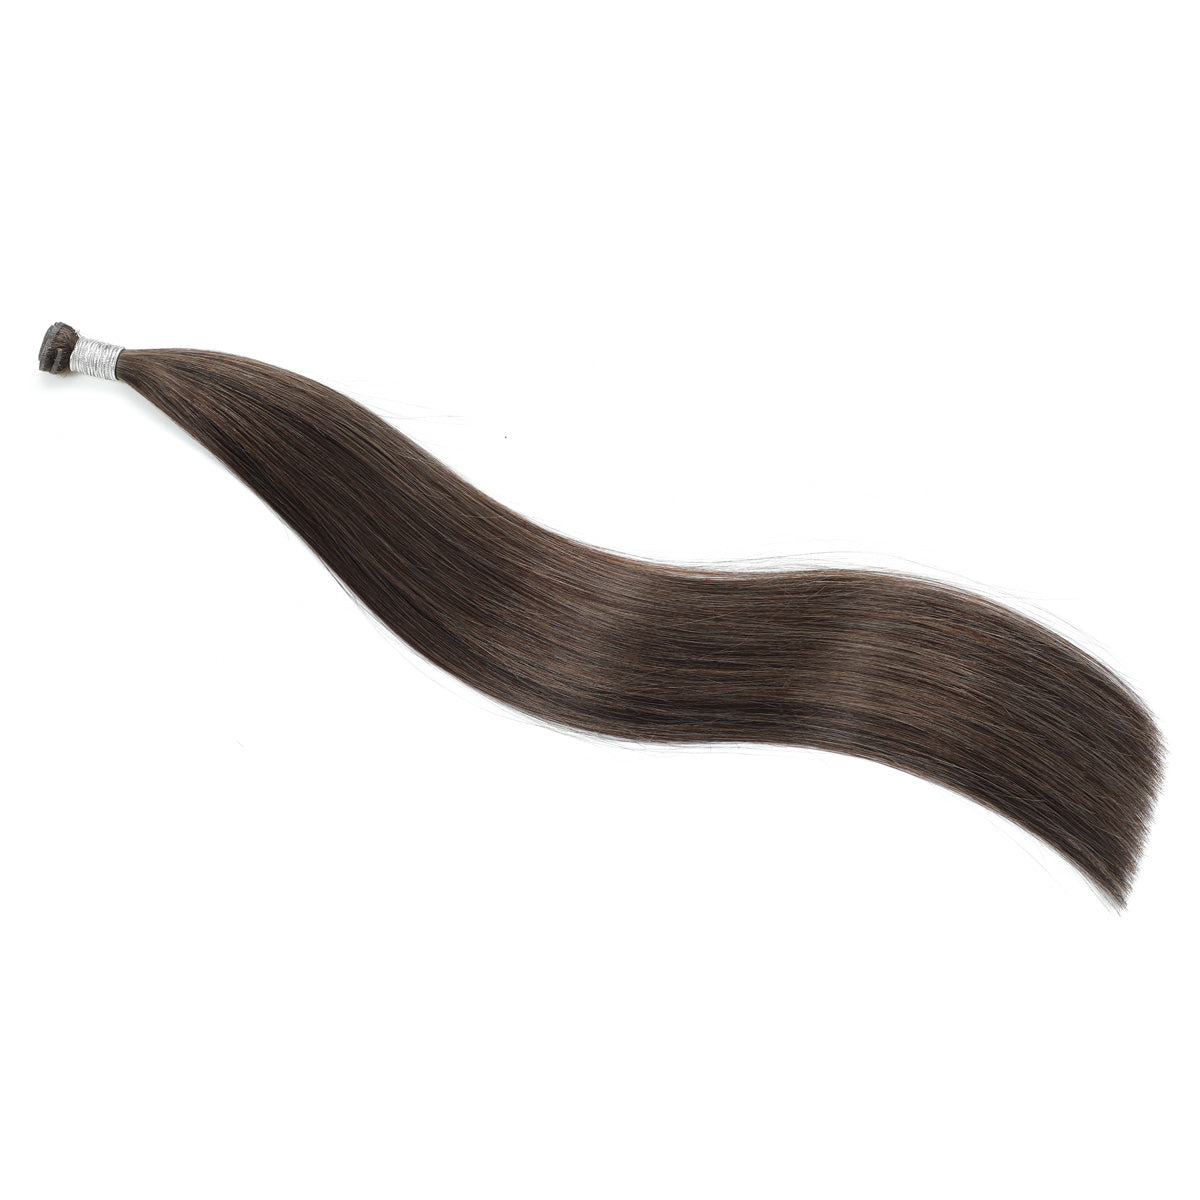 Genius Weft Hair Extensions #2c/8a Chocolate & Ash Brown Mix Highlights